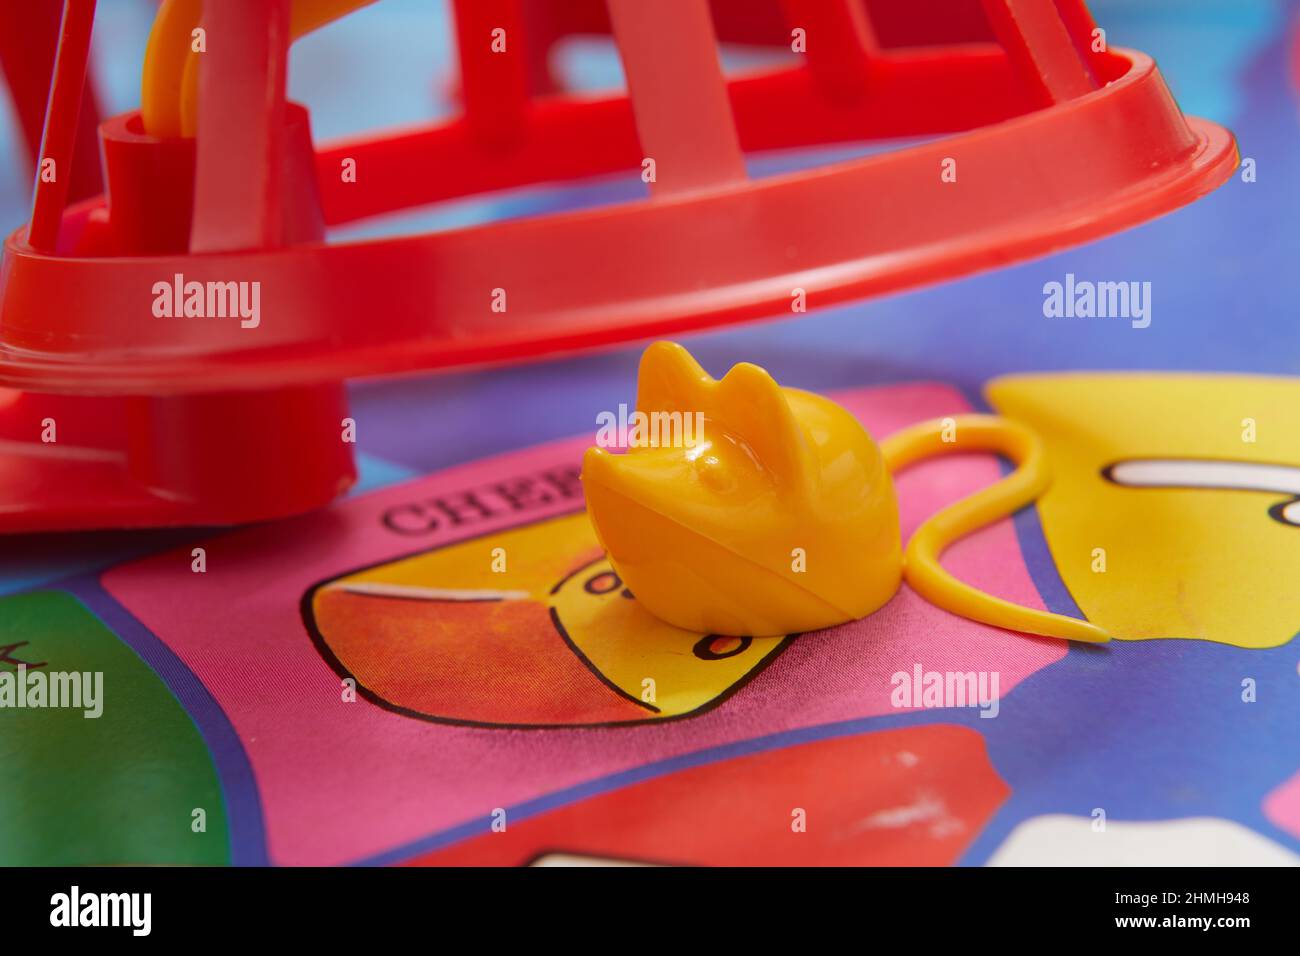 https://c8.alamy.com/comp/2HMH948/close-up-photograph-of-playing-pieces-on-a-mouse-trap-board-game-2HMH948.jpg